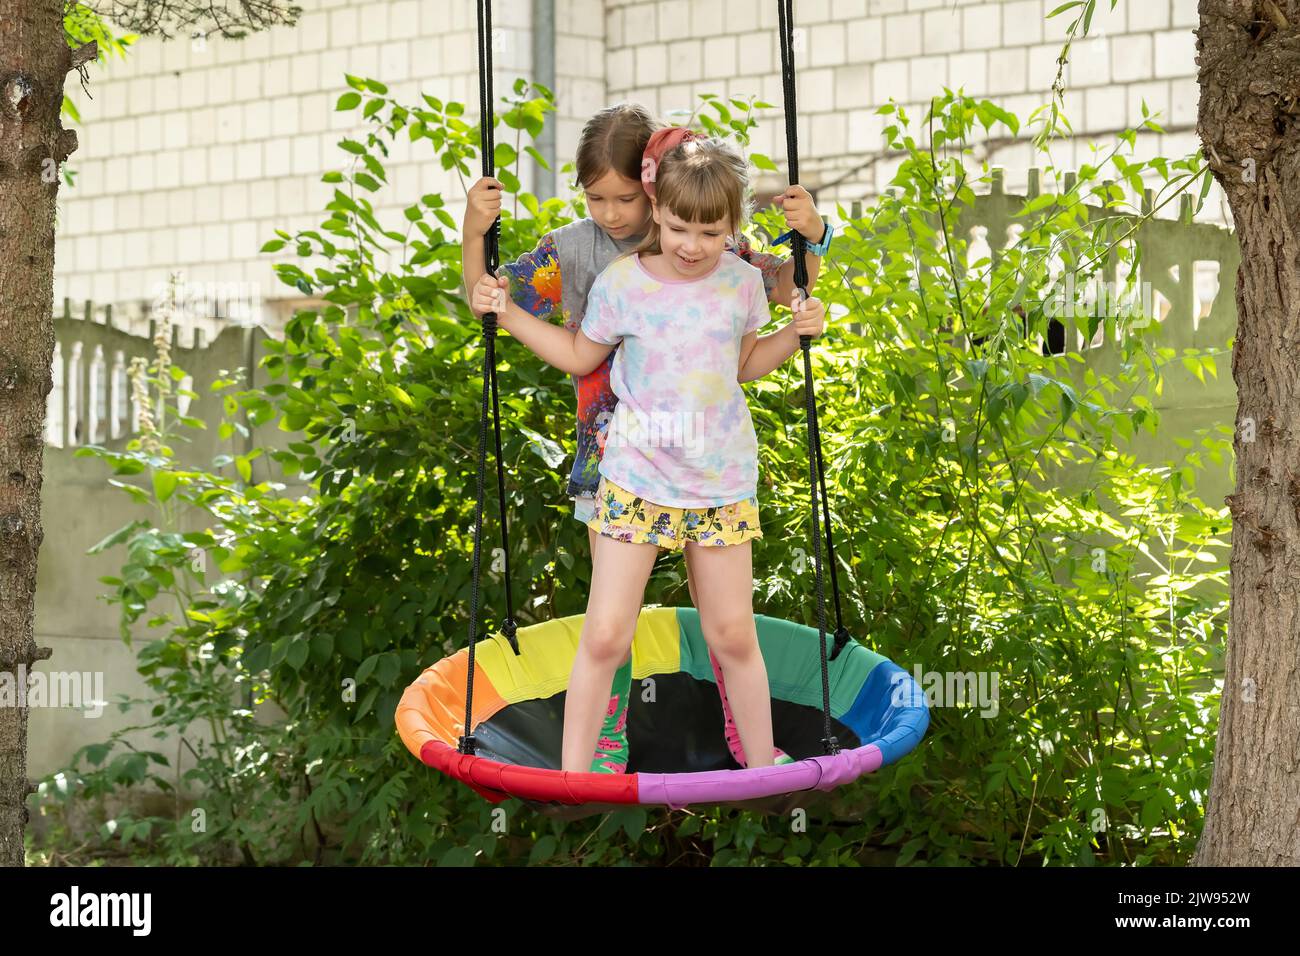 Two girls, children standing together on a swing in the garden, having fun outdoors, smiling. Fun summer activities, sisters, siblings, friends bondin Stock Photo